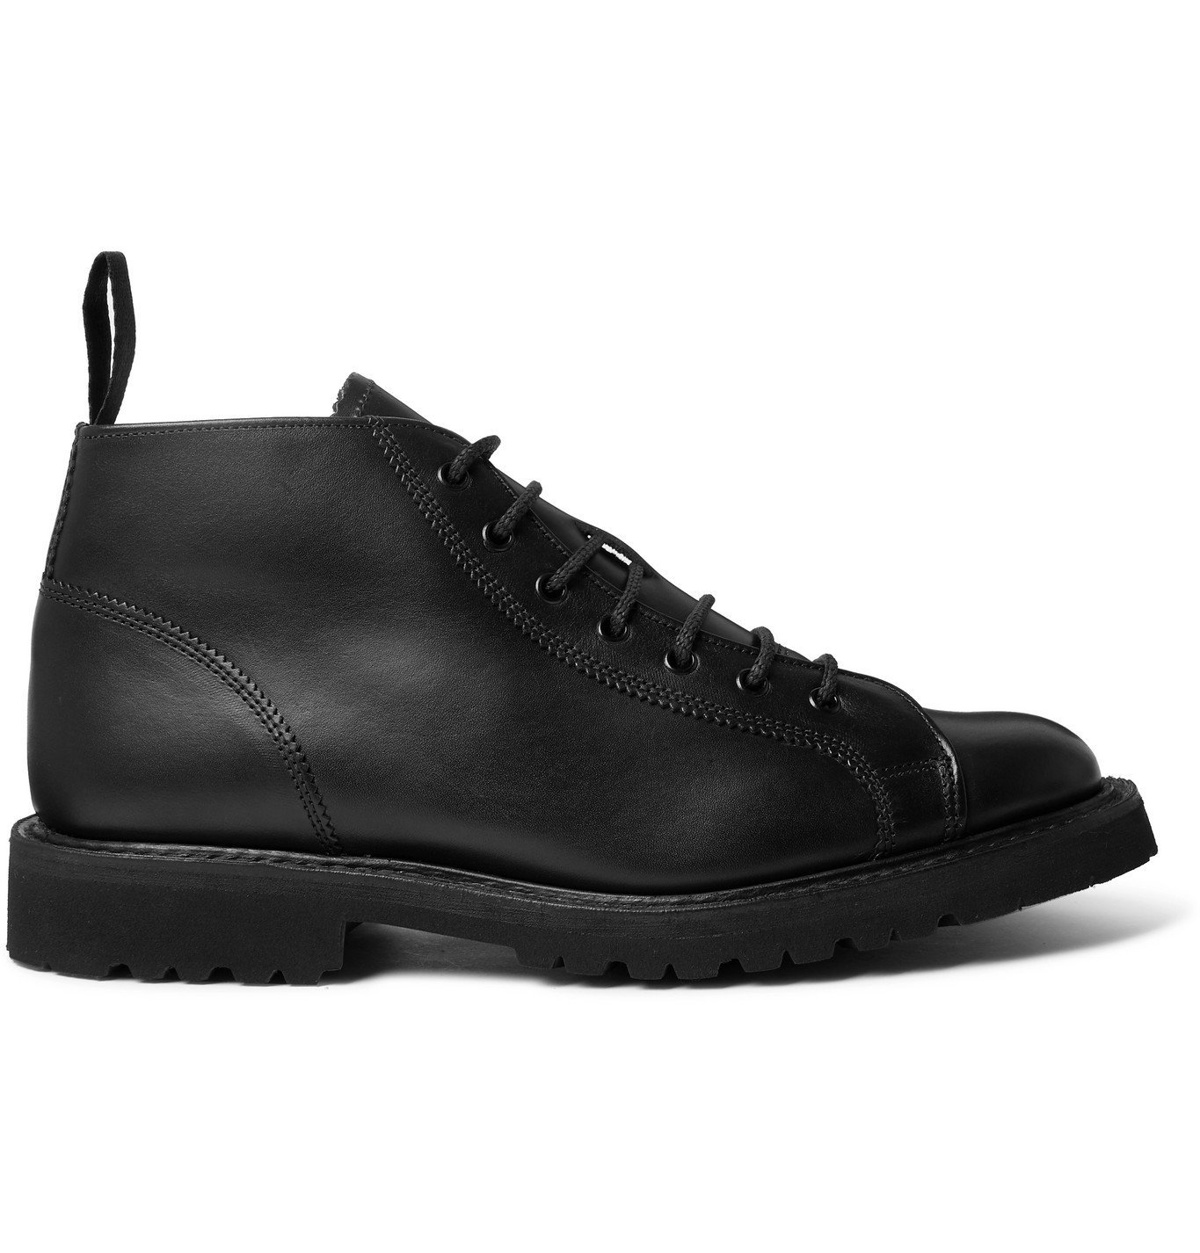 Tricker's - Ethan Leather Boots - Black Tricker's